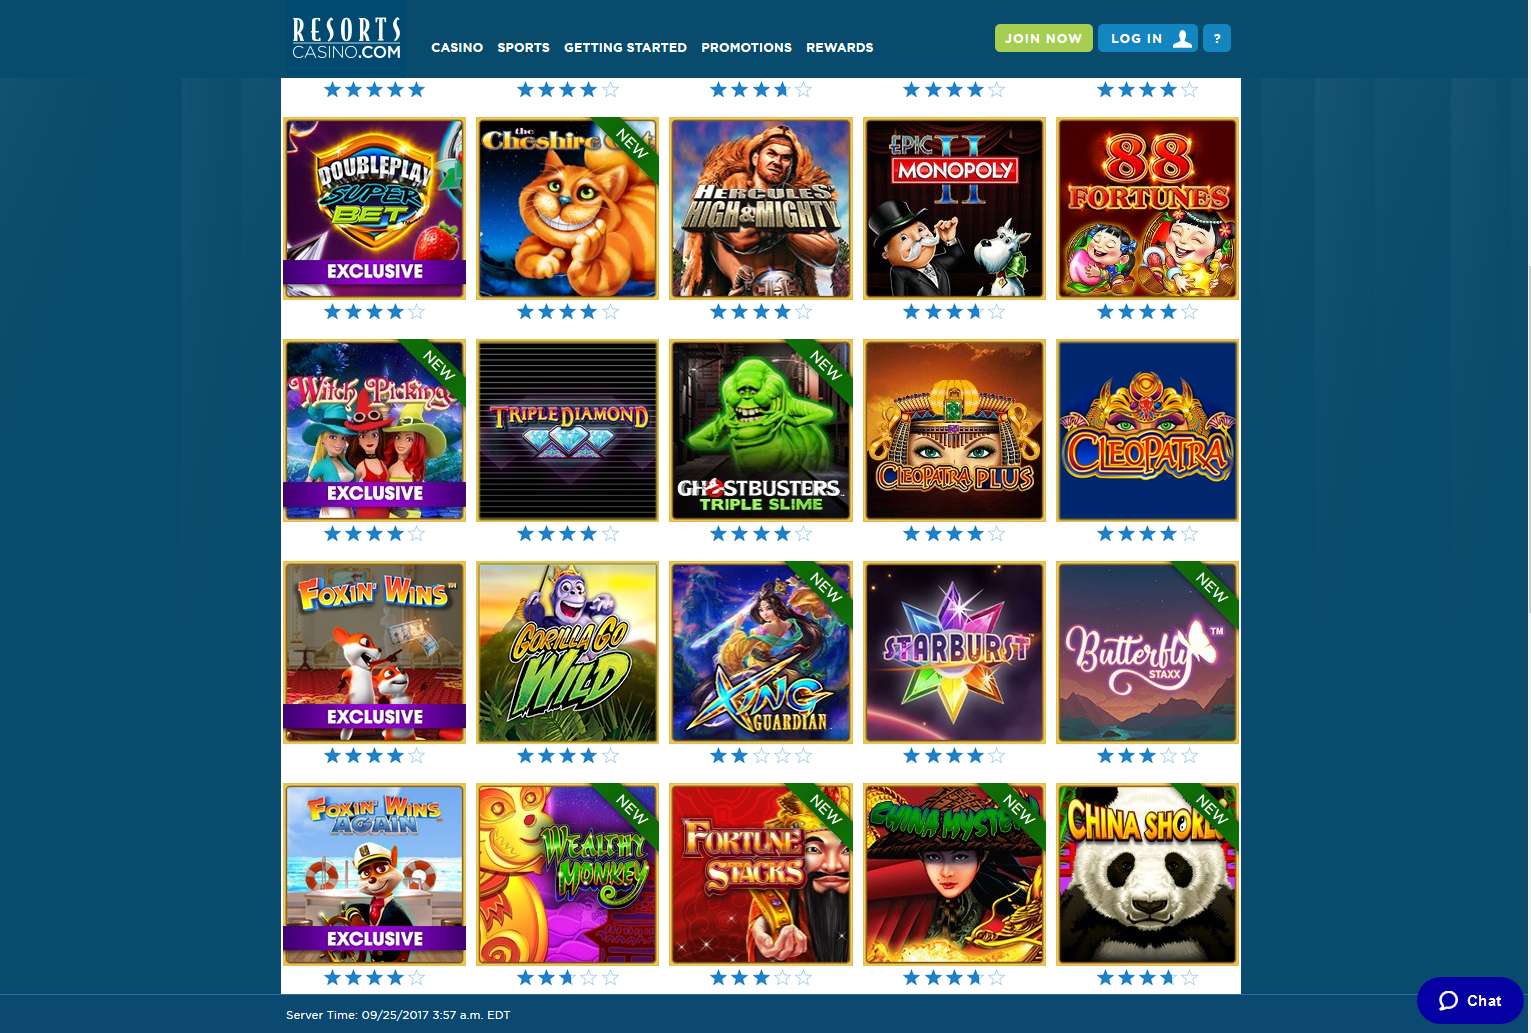 Resorts Online Casino download the last version for windows